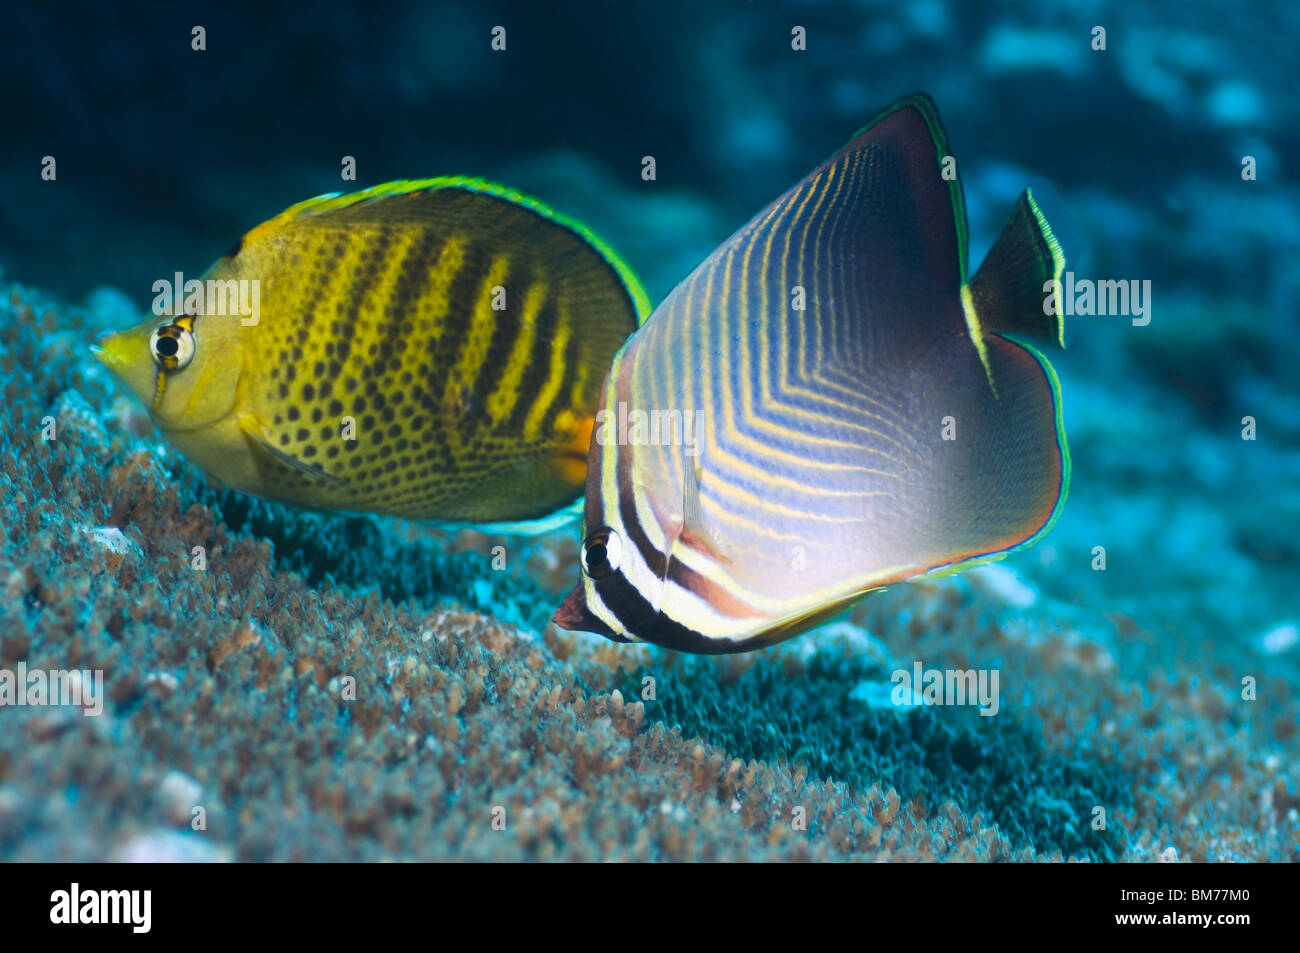 Eastern triangle butterflyfish  and a Dot-and-dash butterflyfish.   Misool, Raja Empat, West Papua, Indonesia Stock Photo